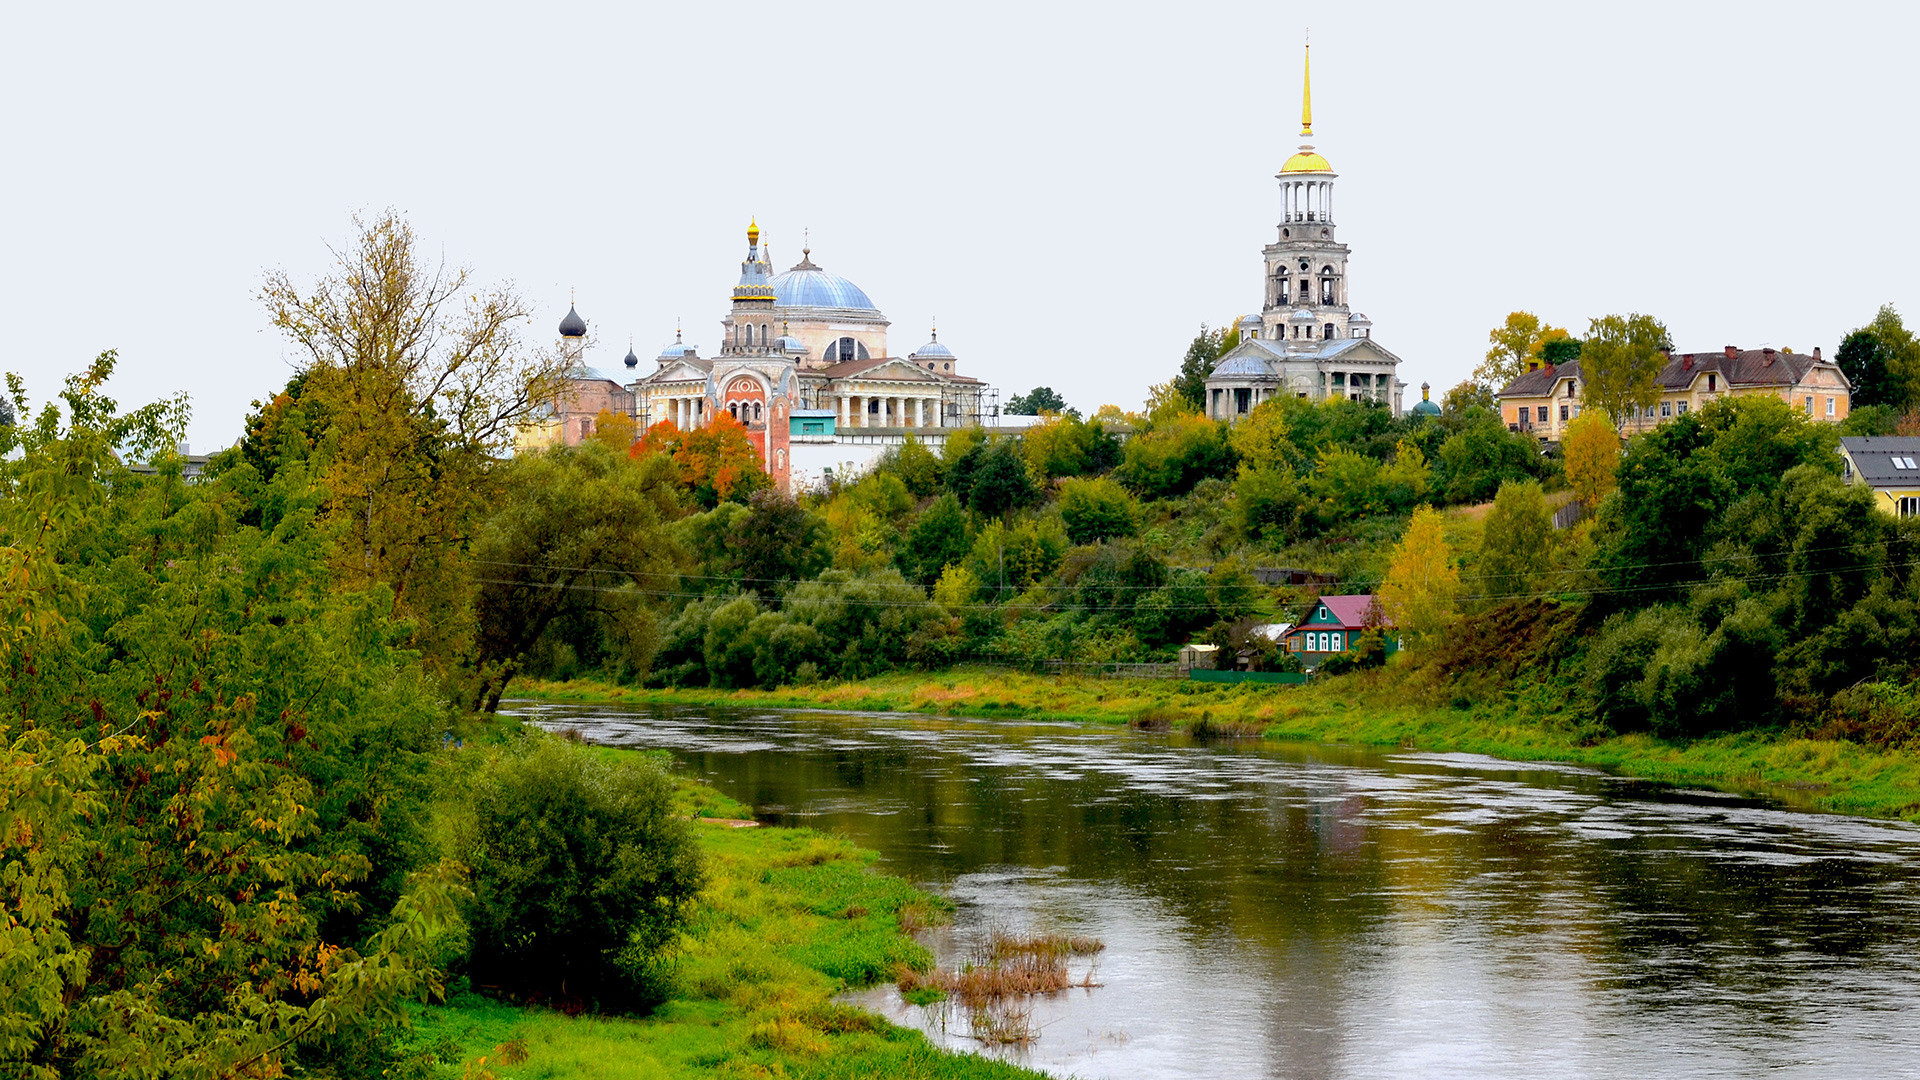 Torzhok: The Russian capital of gold embroidery.